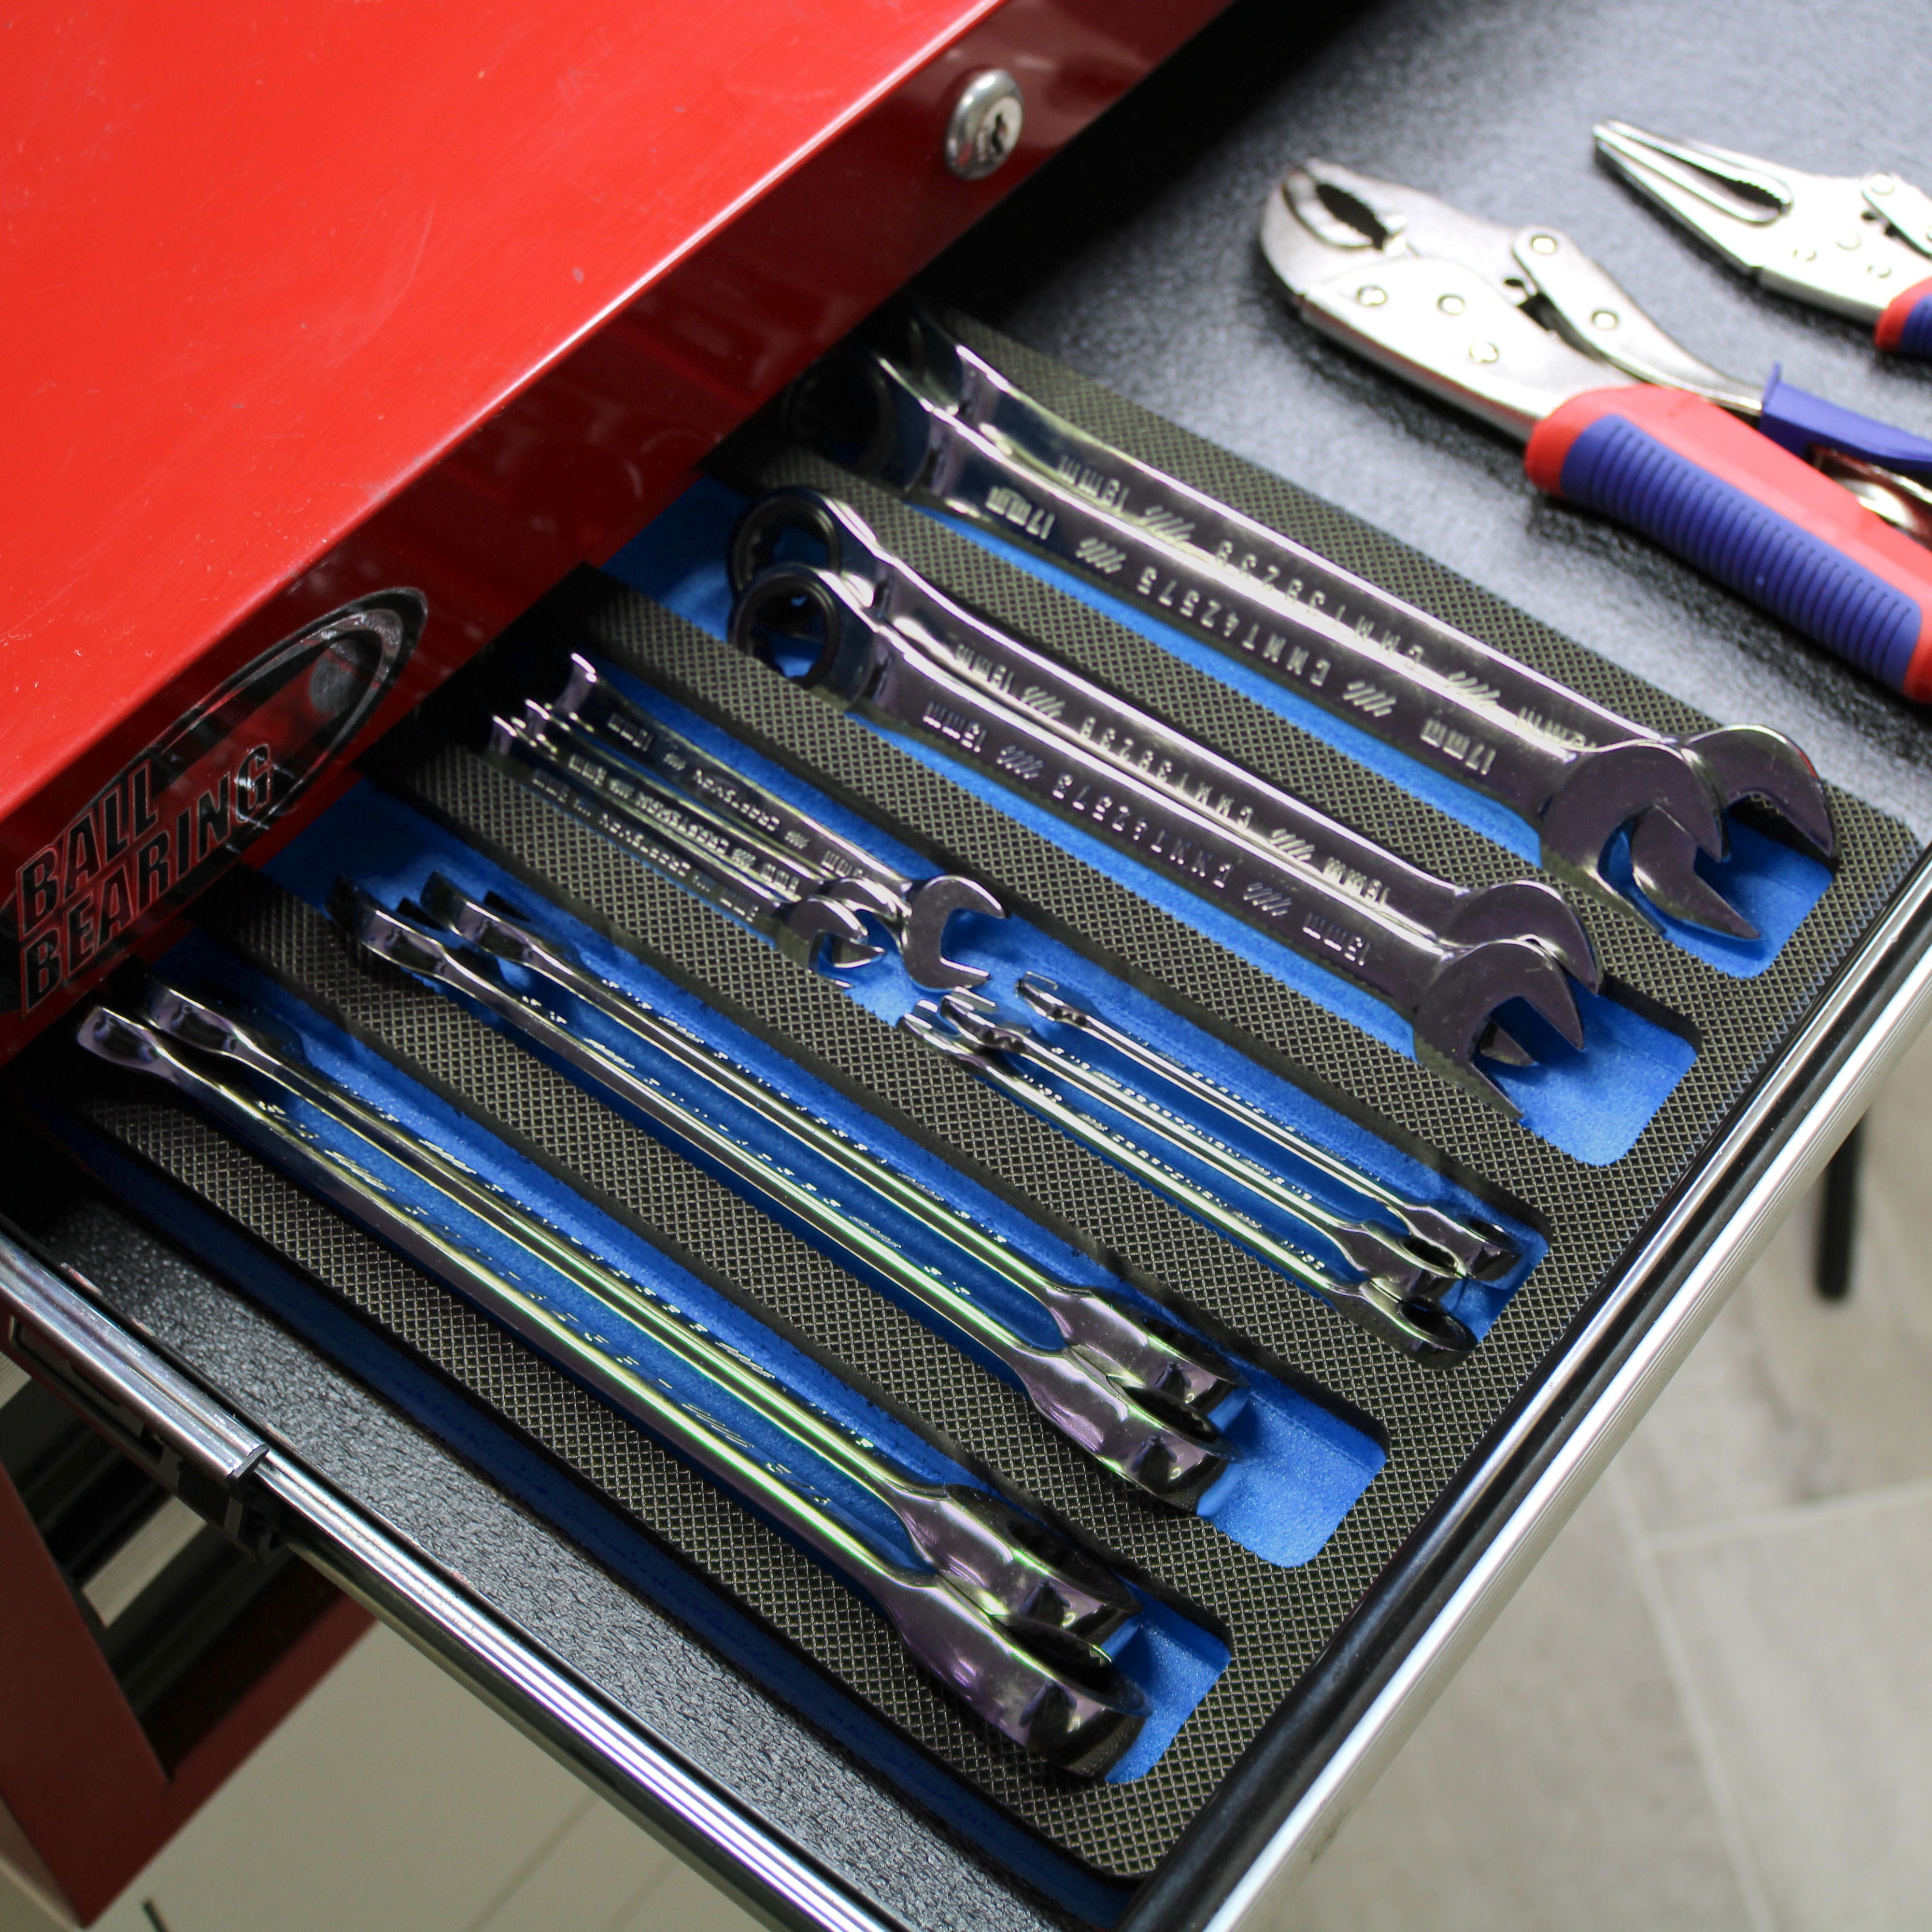 Tool Drawer Organizer Wrench Holder Insert Blue and Black Durable Foam Tray 5 Pockets Holds Wrenches Up To 10 Inches Long Fits Craftsman Husky Kobalt Milwaukee Many Others